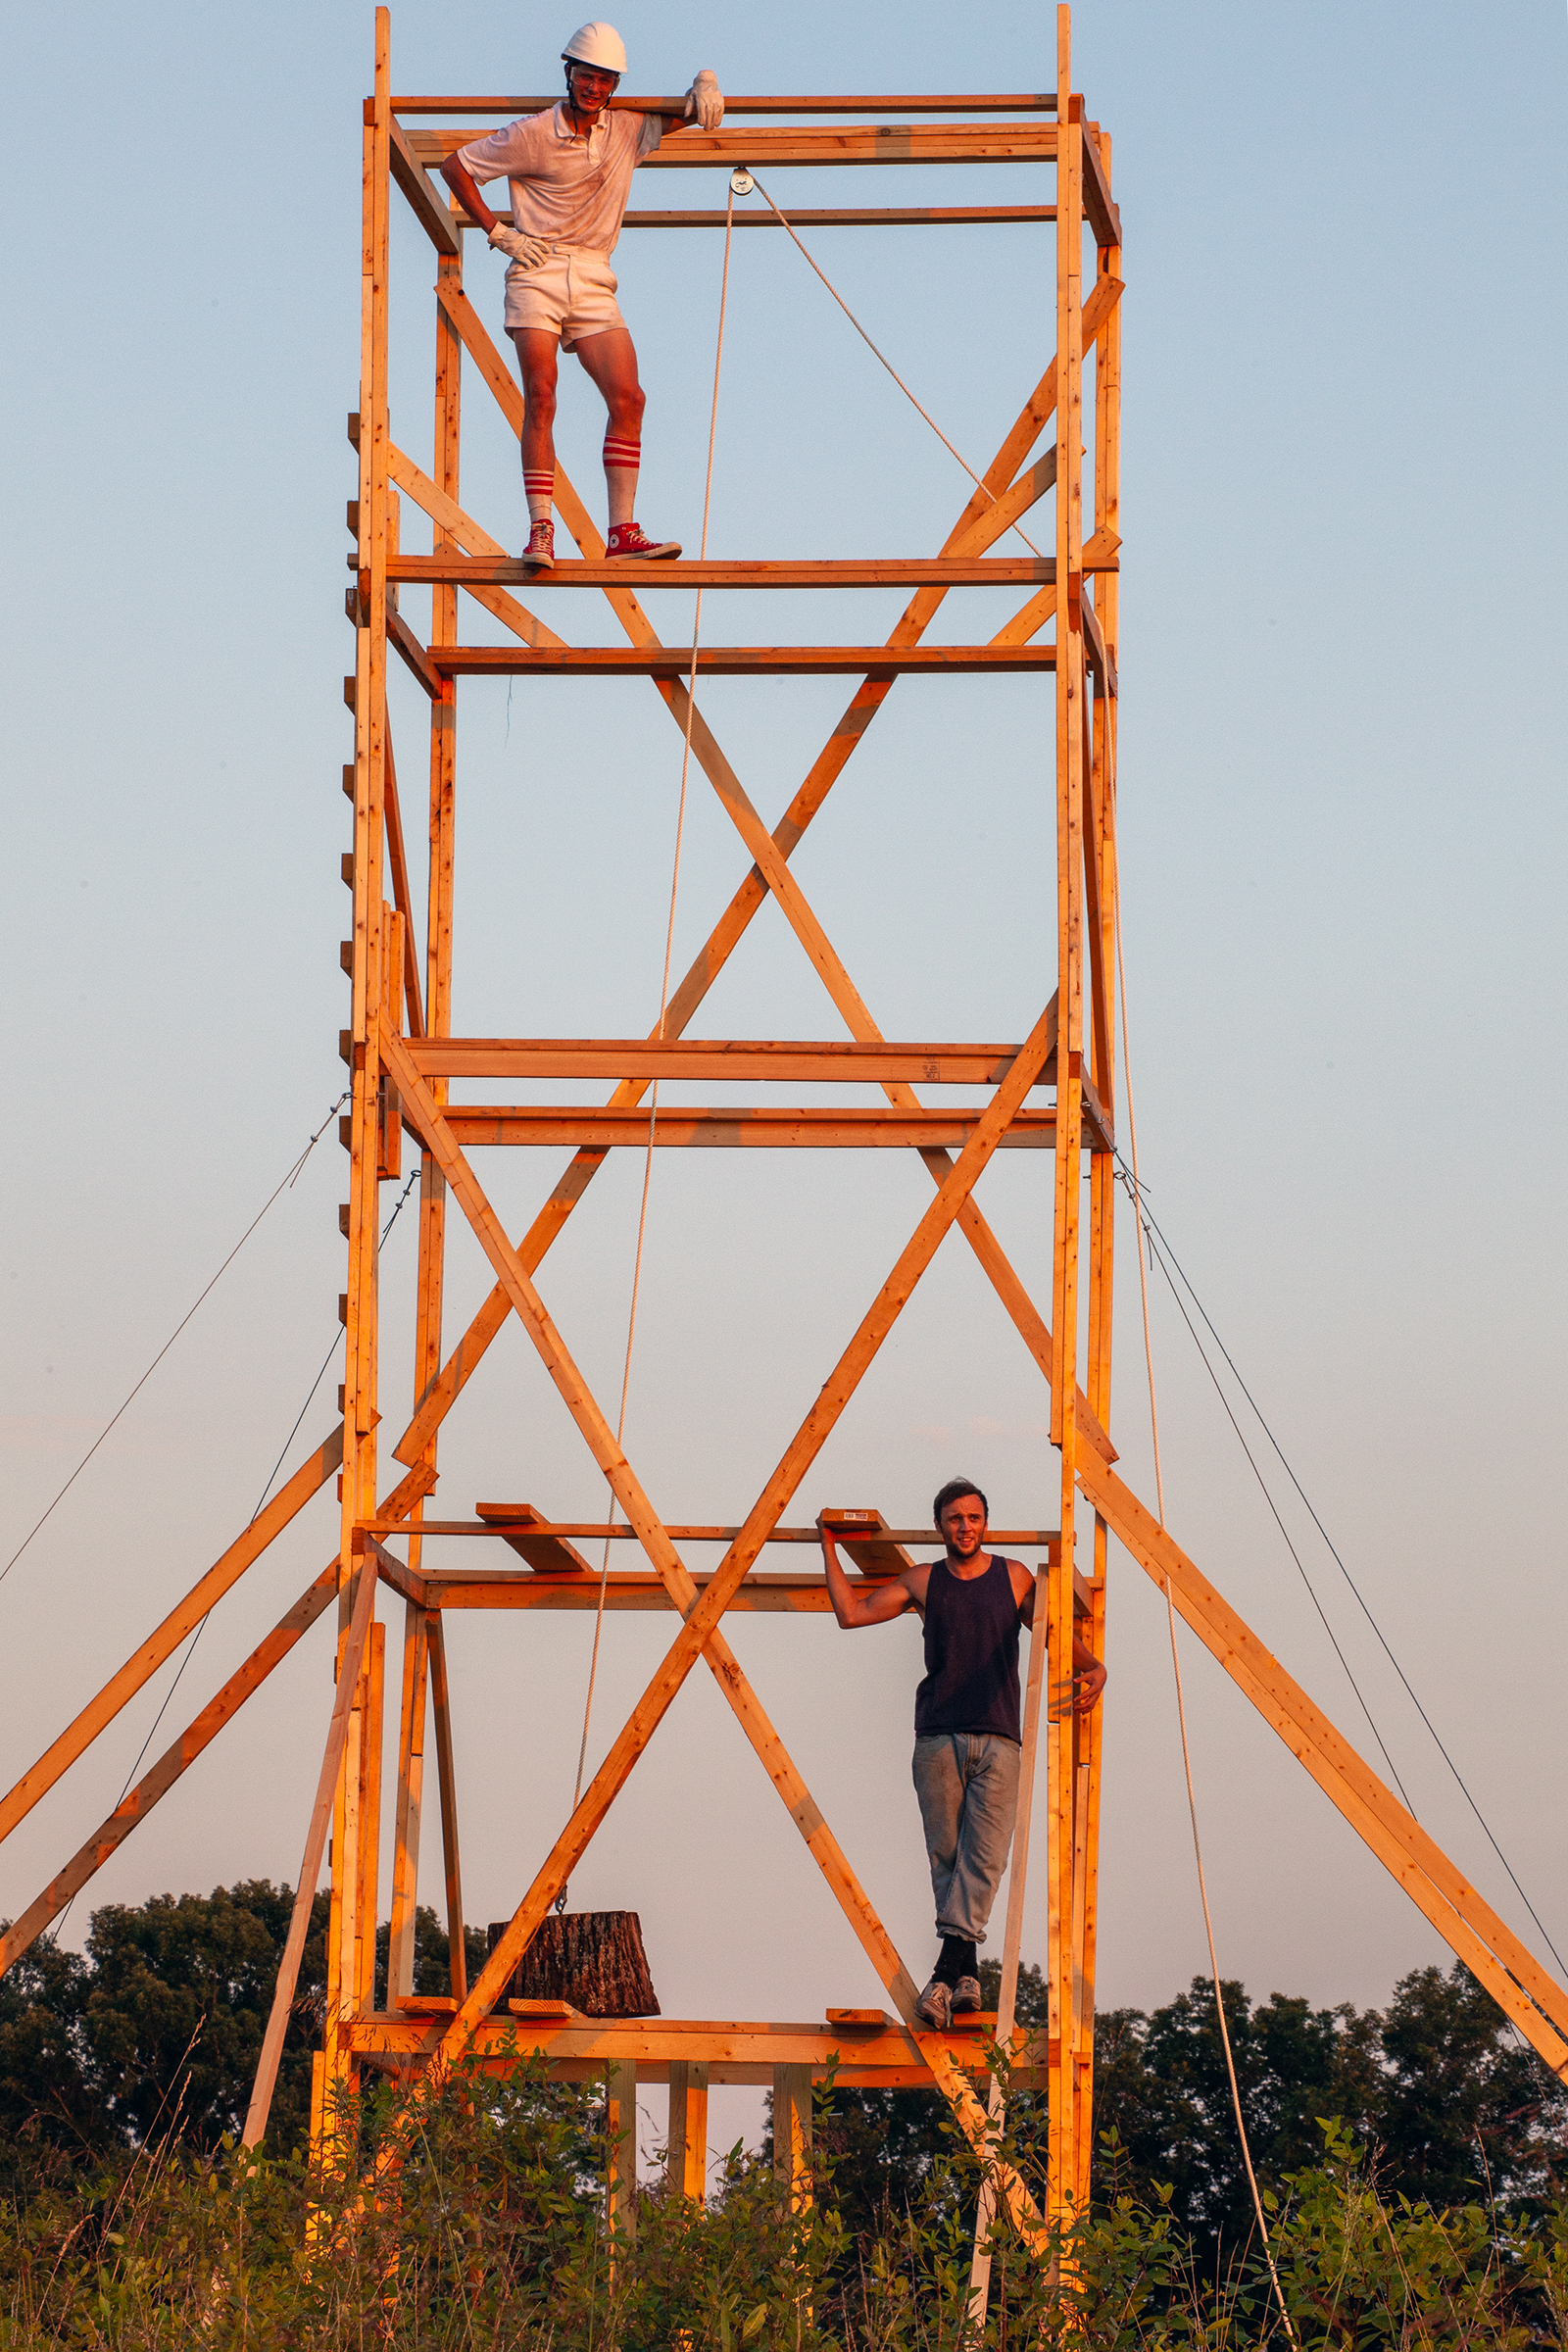 A photograph of two people standing on a wooden scaffolding at sunset